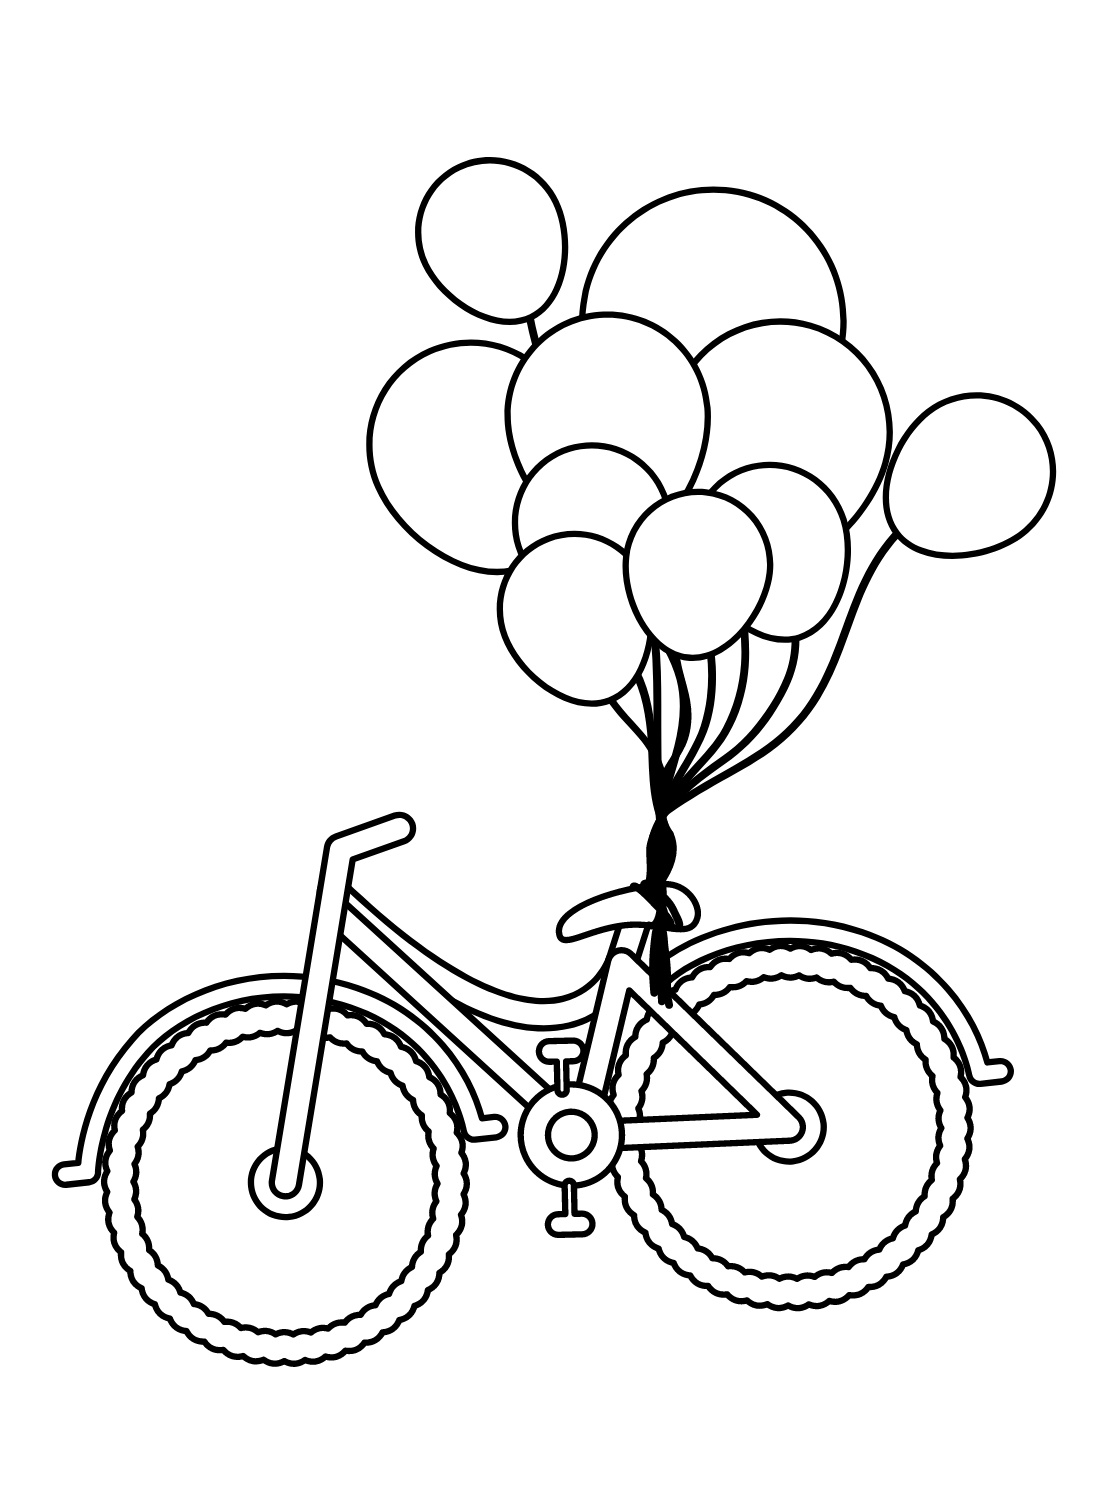 Bicycle and Balloons Coloring Page